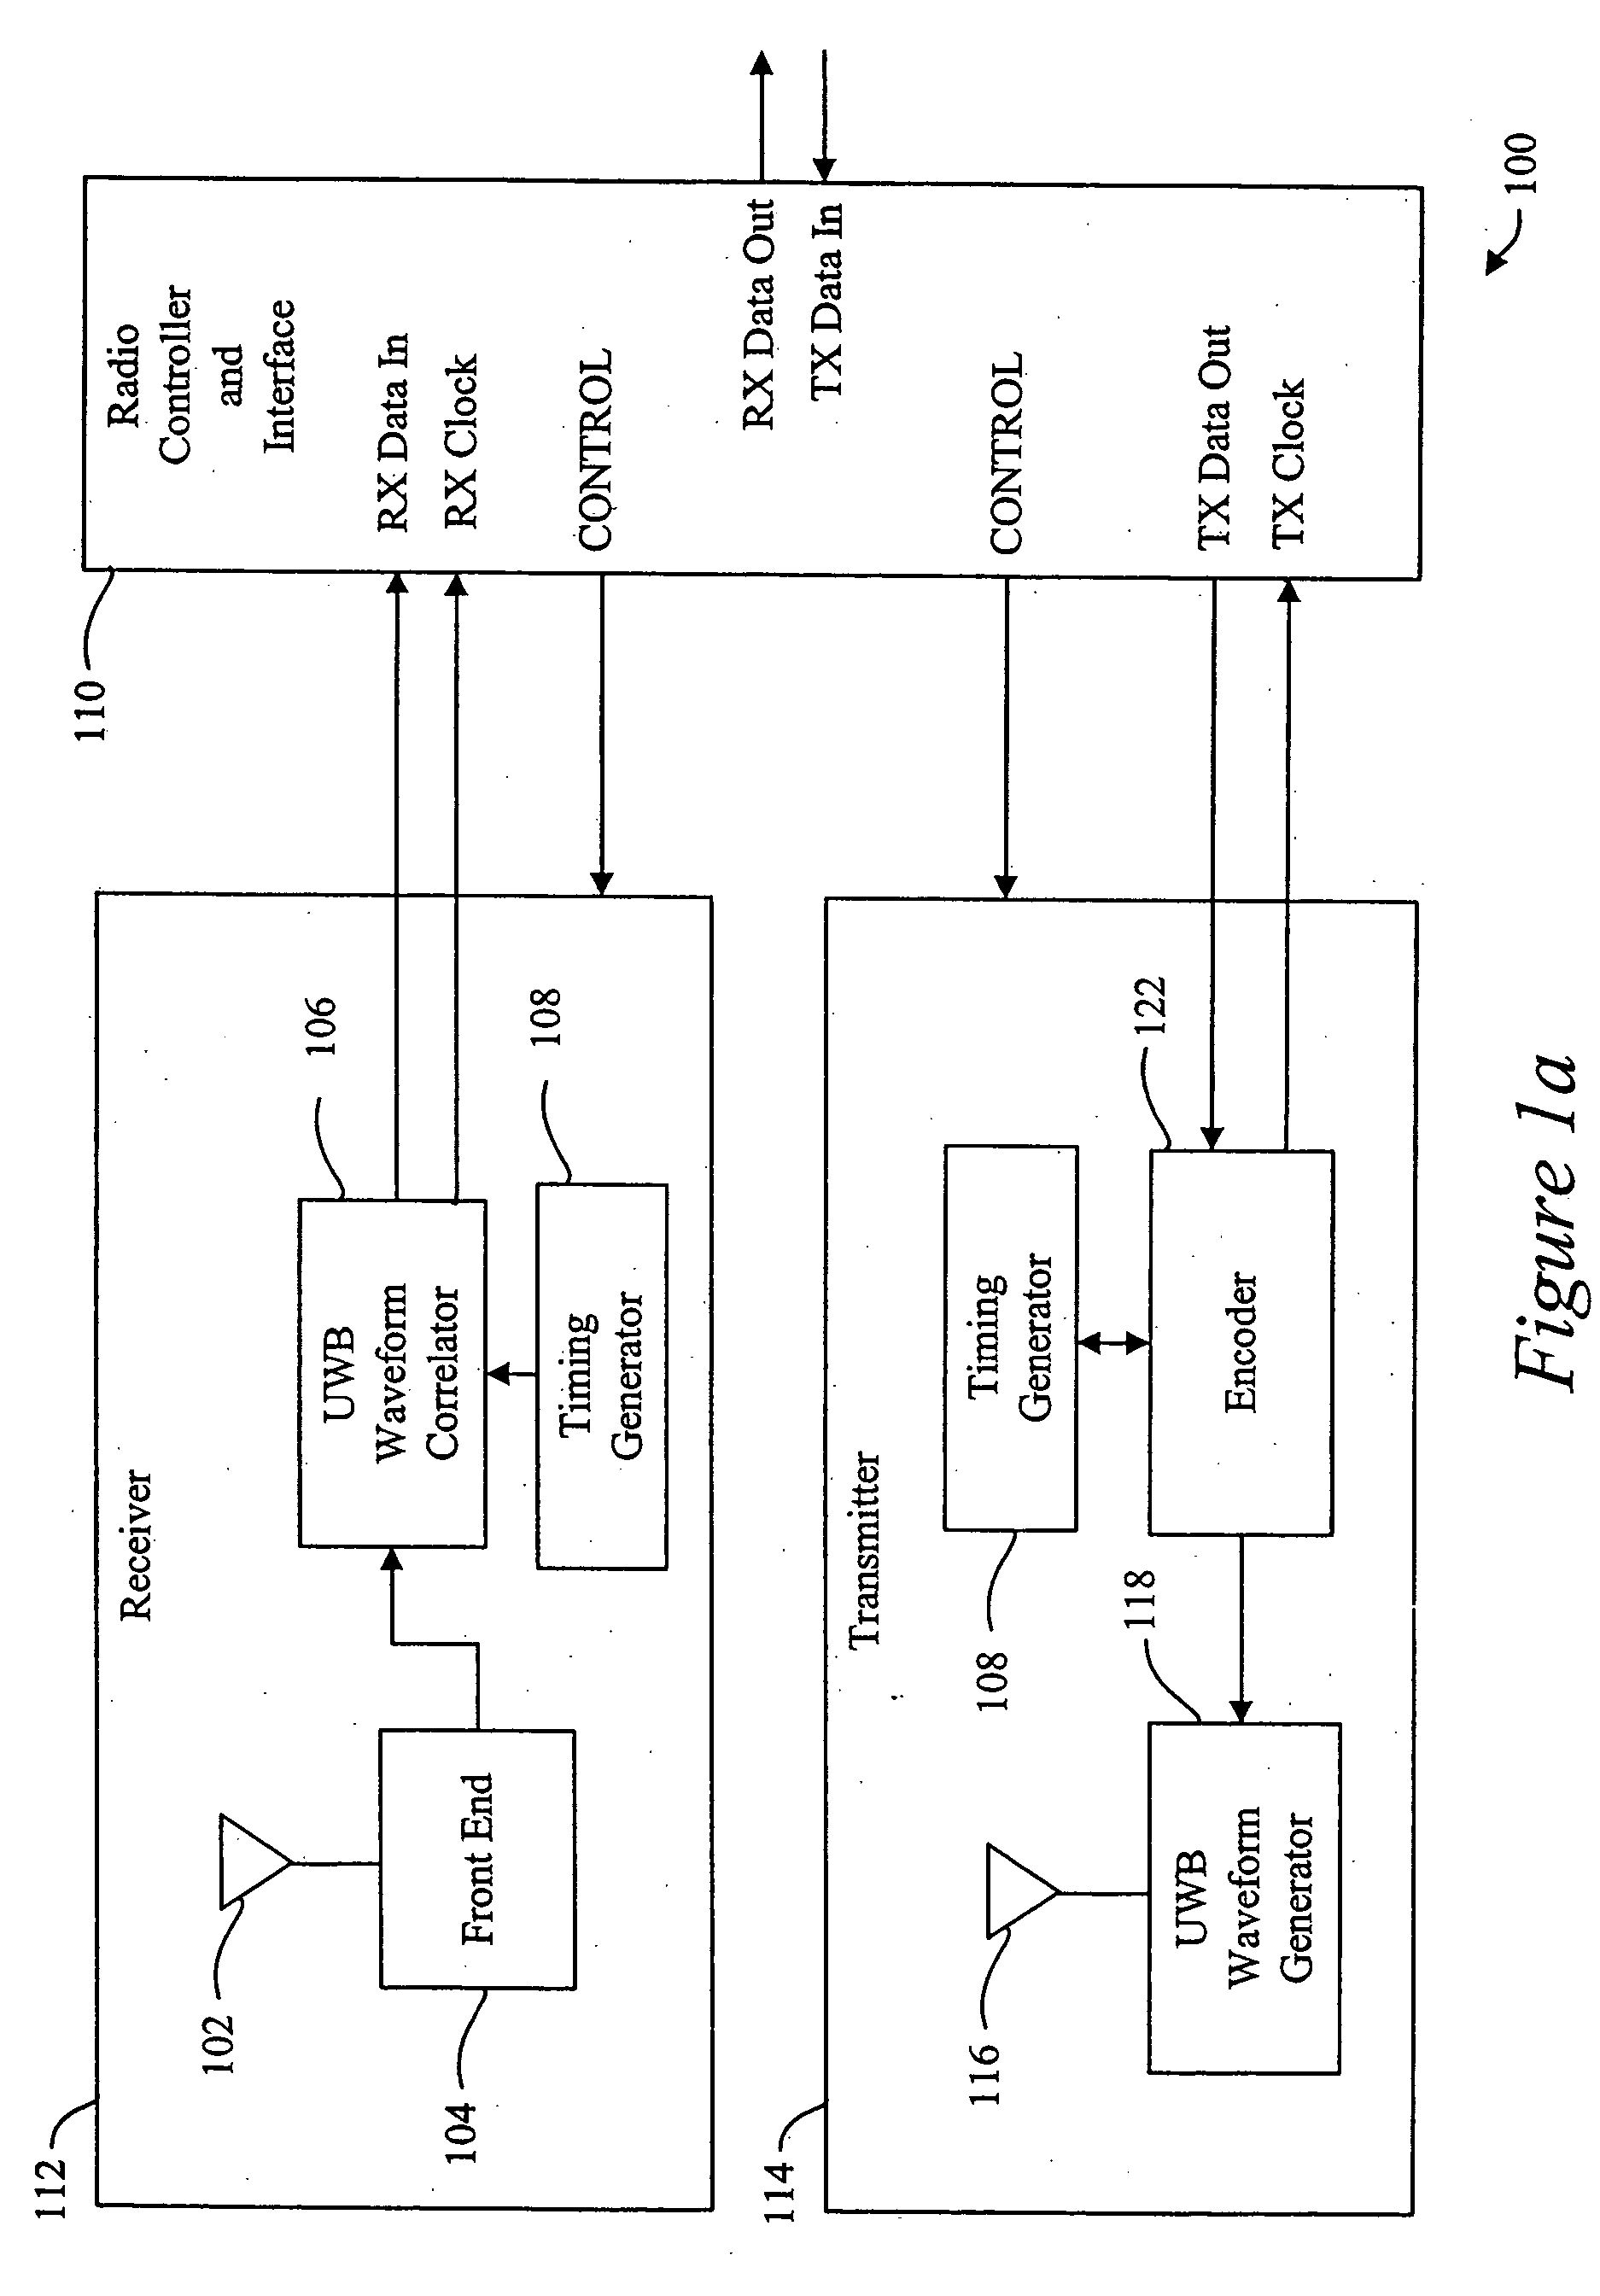 Low power, high resolution timing generator for ultra-wide bandwidth communication systems